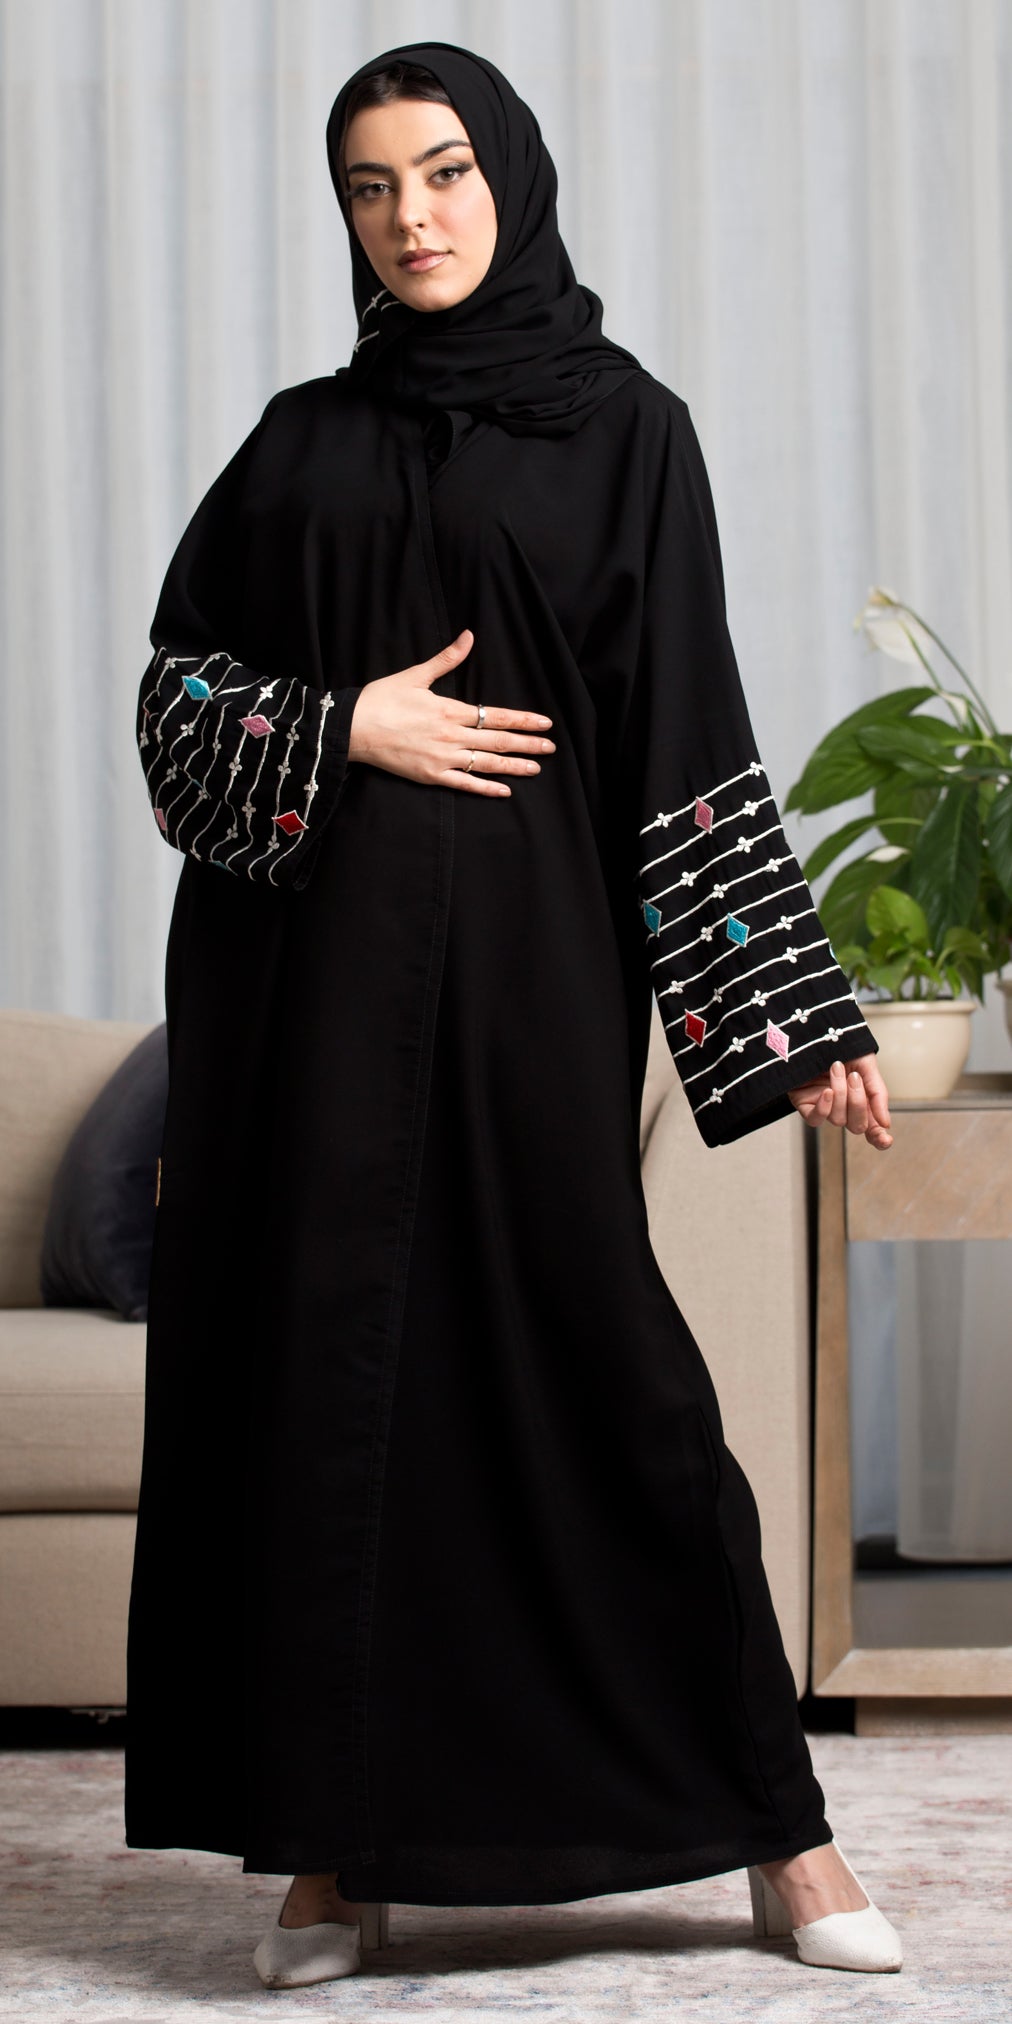 BL-0194 Abaya, classic style, black crepe, with embroidery on the sleeves